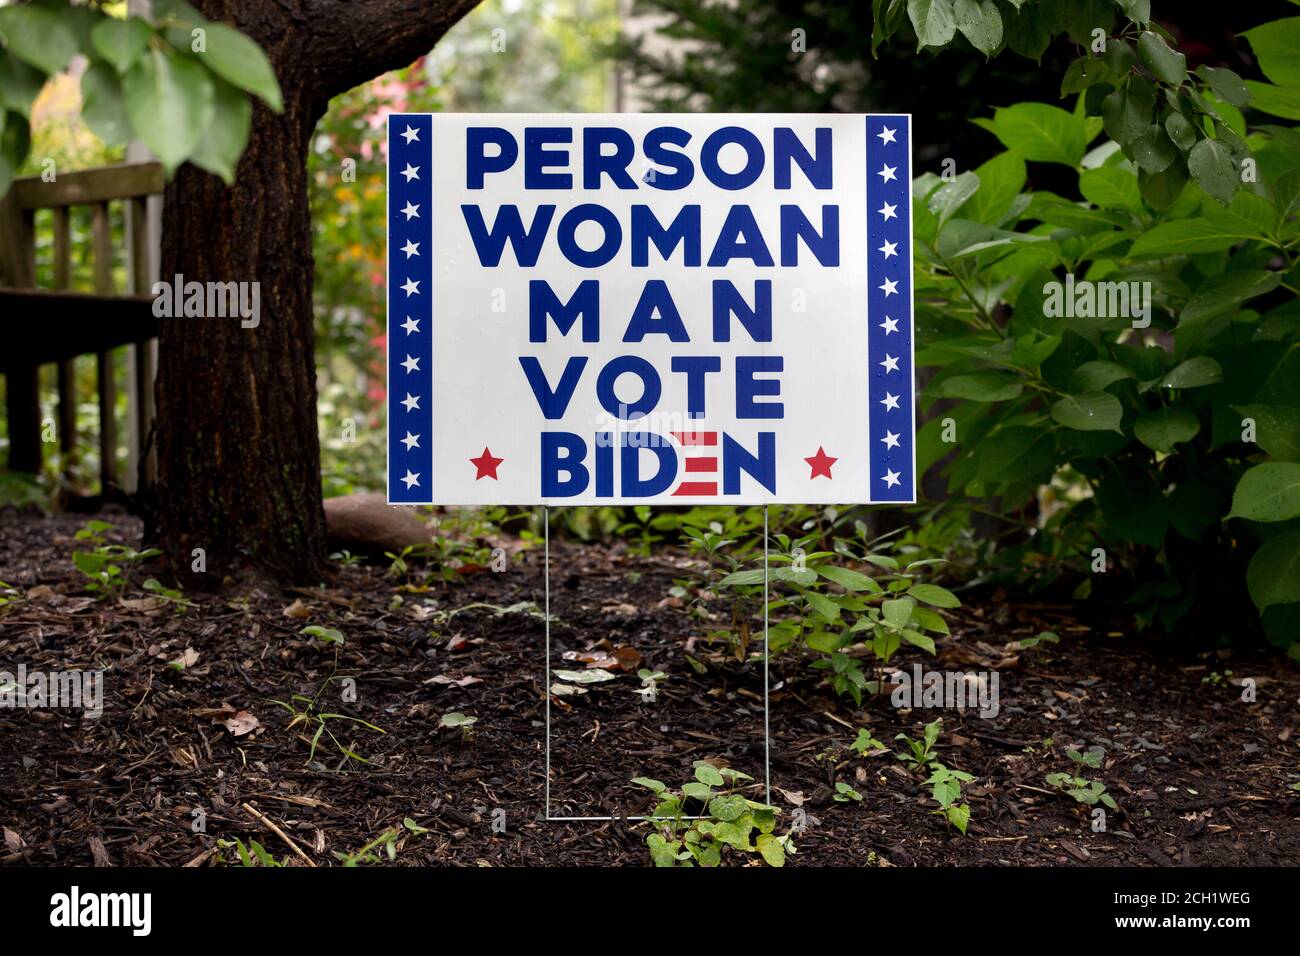 A 2020 US presidential yard sign for democrat Joe Biden.  The sign is a parody of a 2018 cognitive test taken by President Donald Trump which included Stock Photo